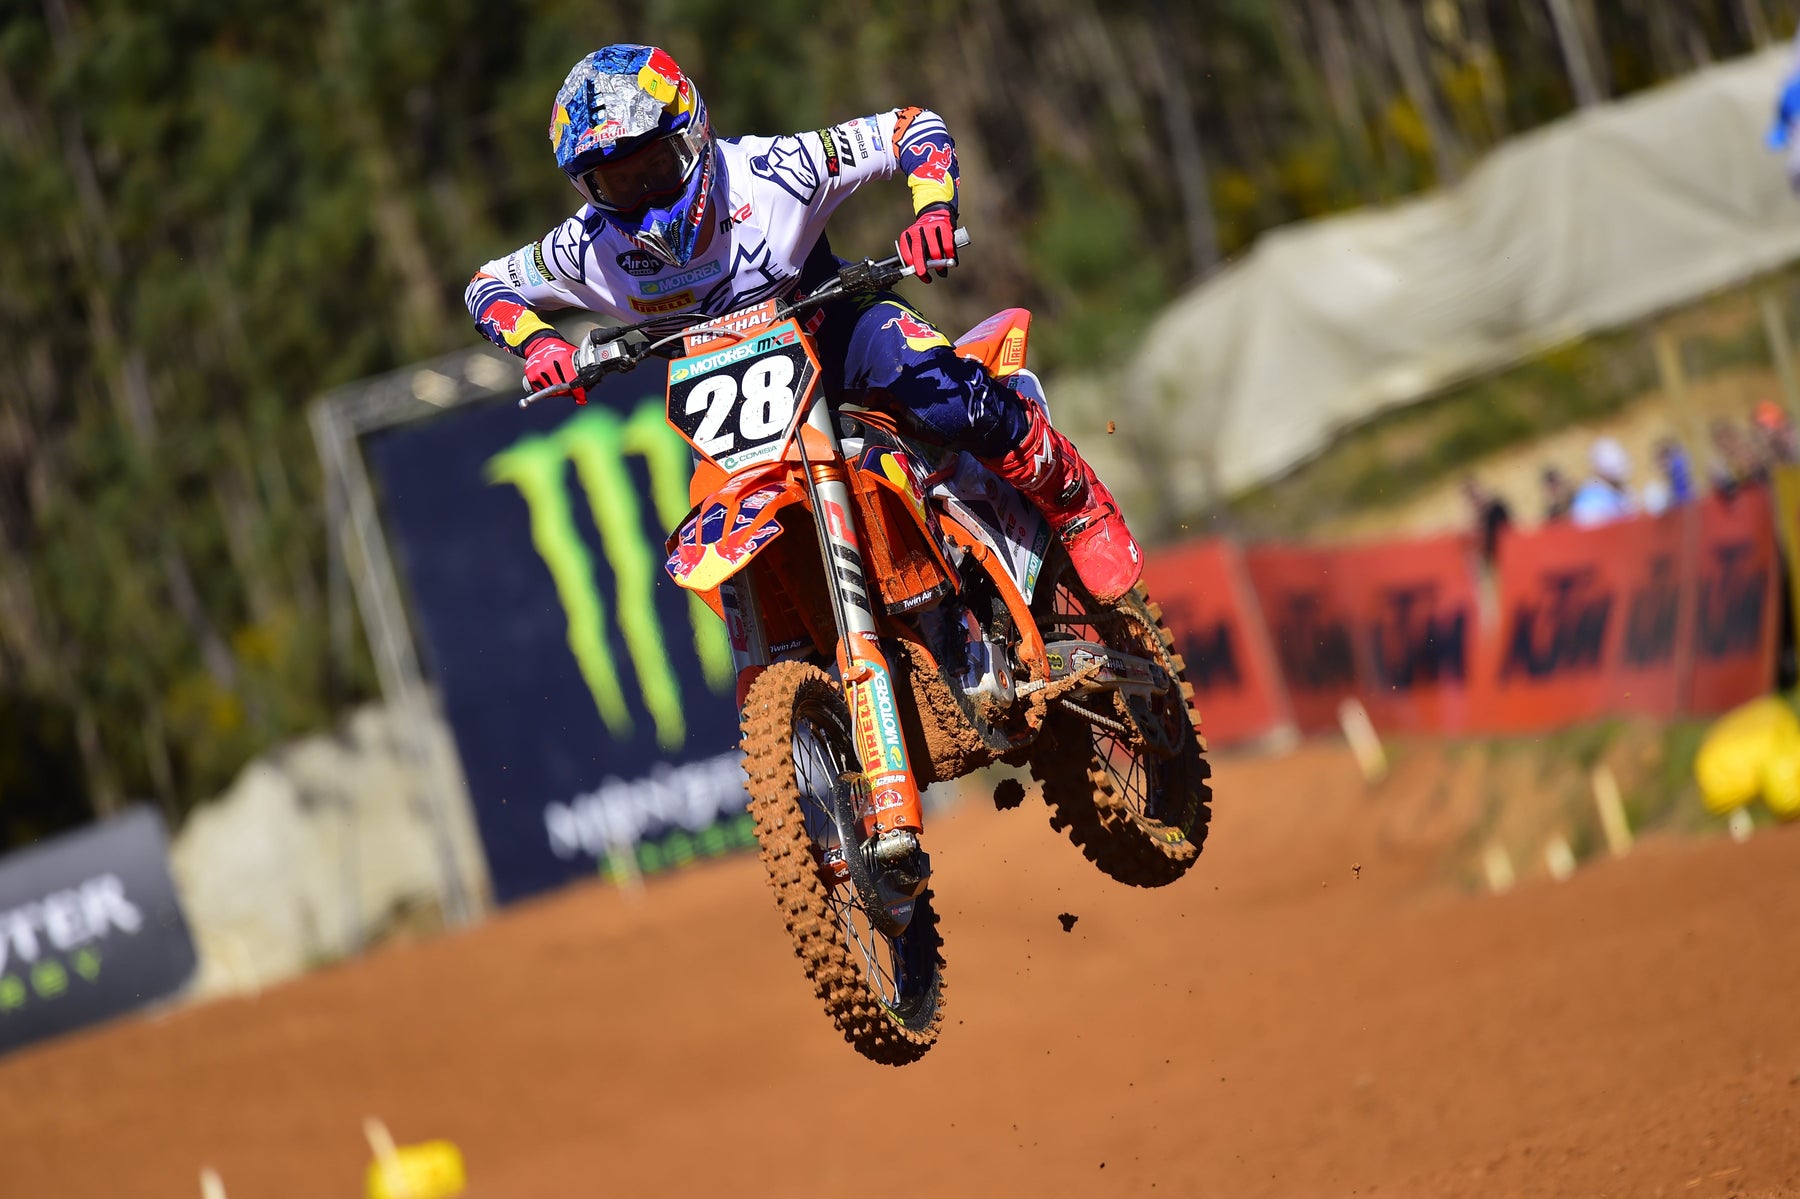 TOM VIALLE AND JAGO GEERTS WIN MX2 MOTOS IN AGUEDA, PORTUGAL DOUBLE PODIUM FOR ALPINESTARS